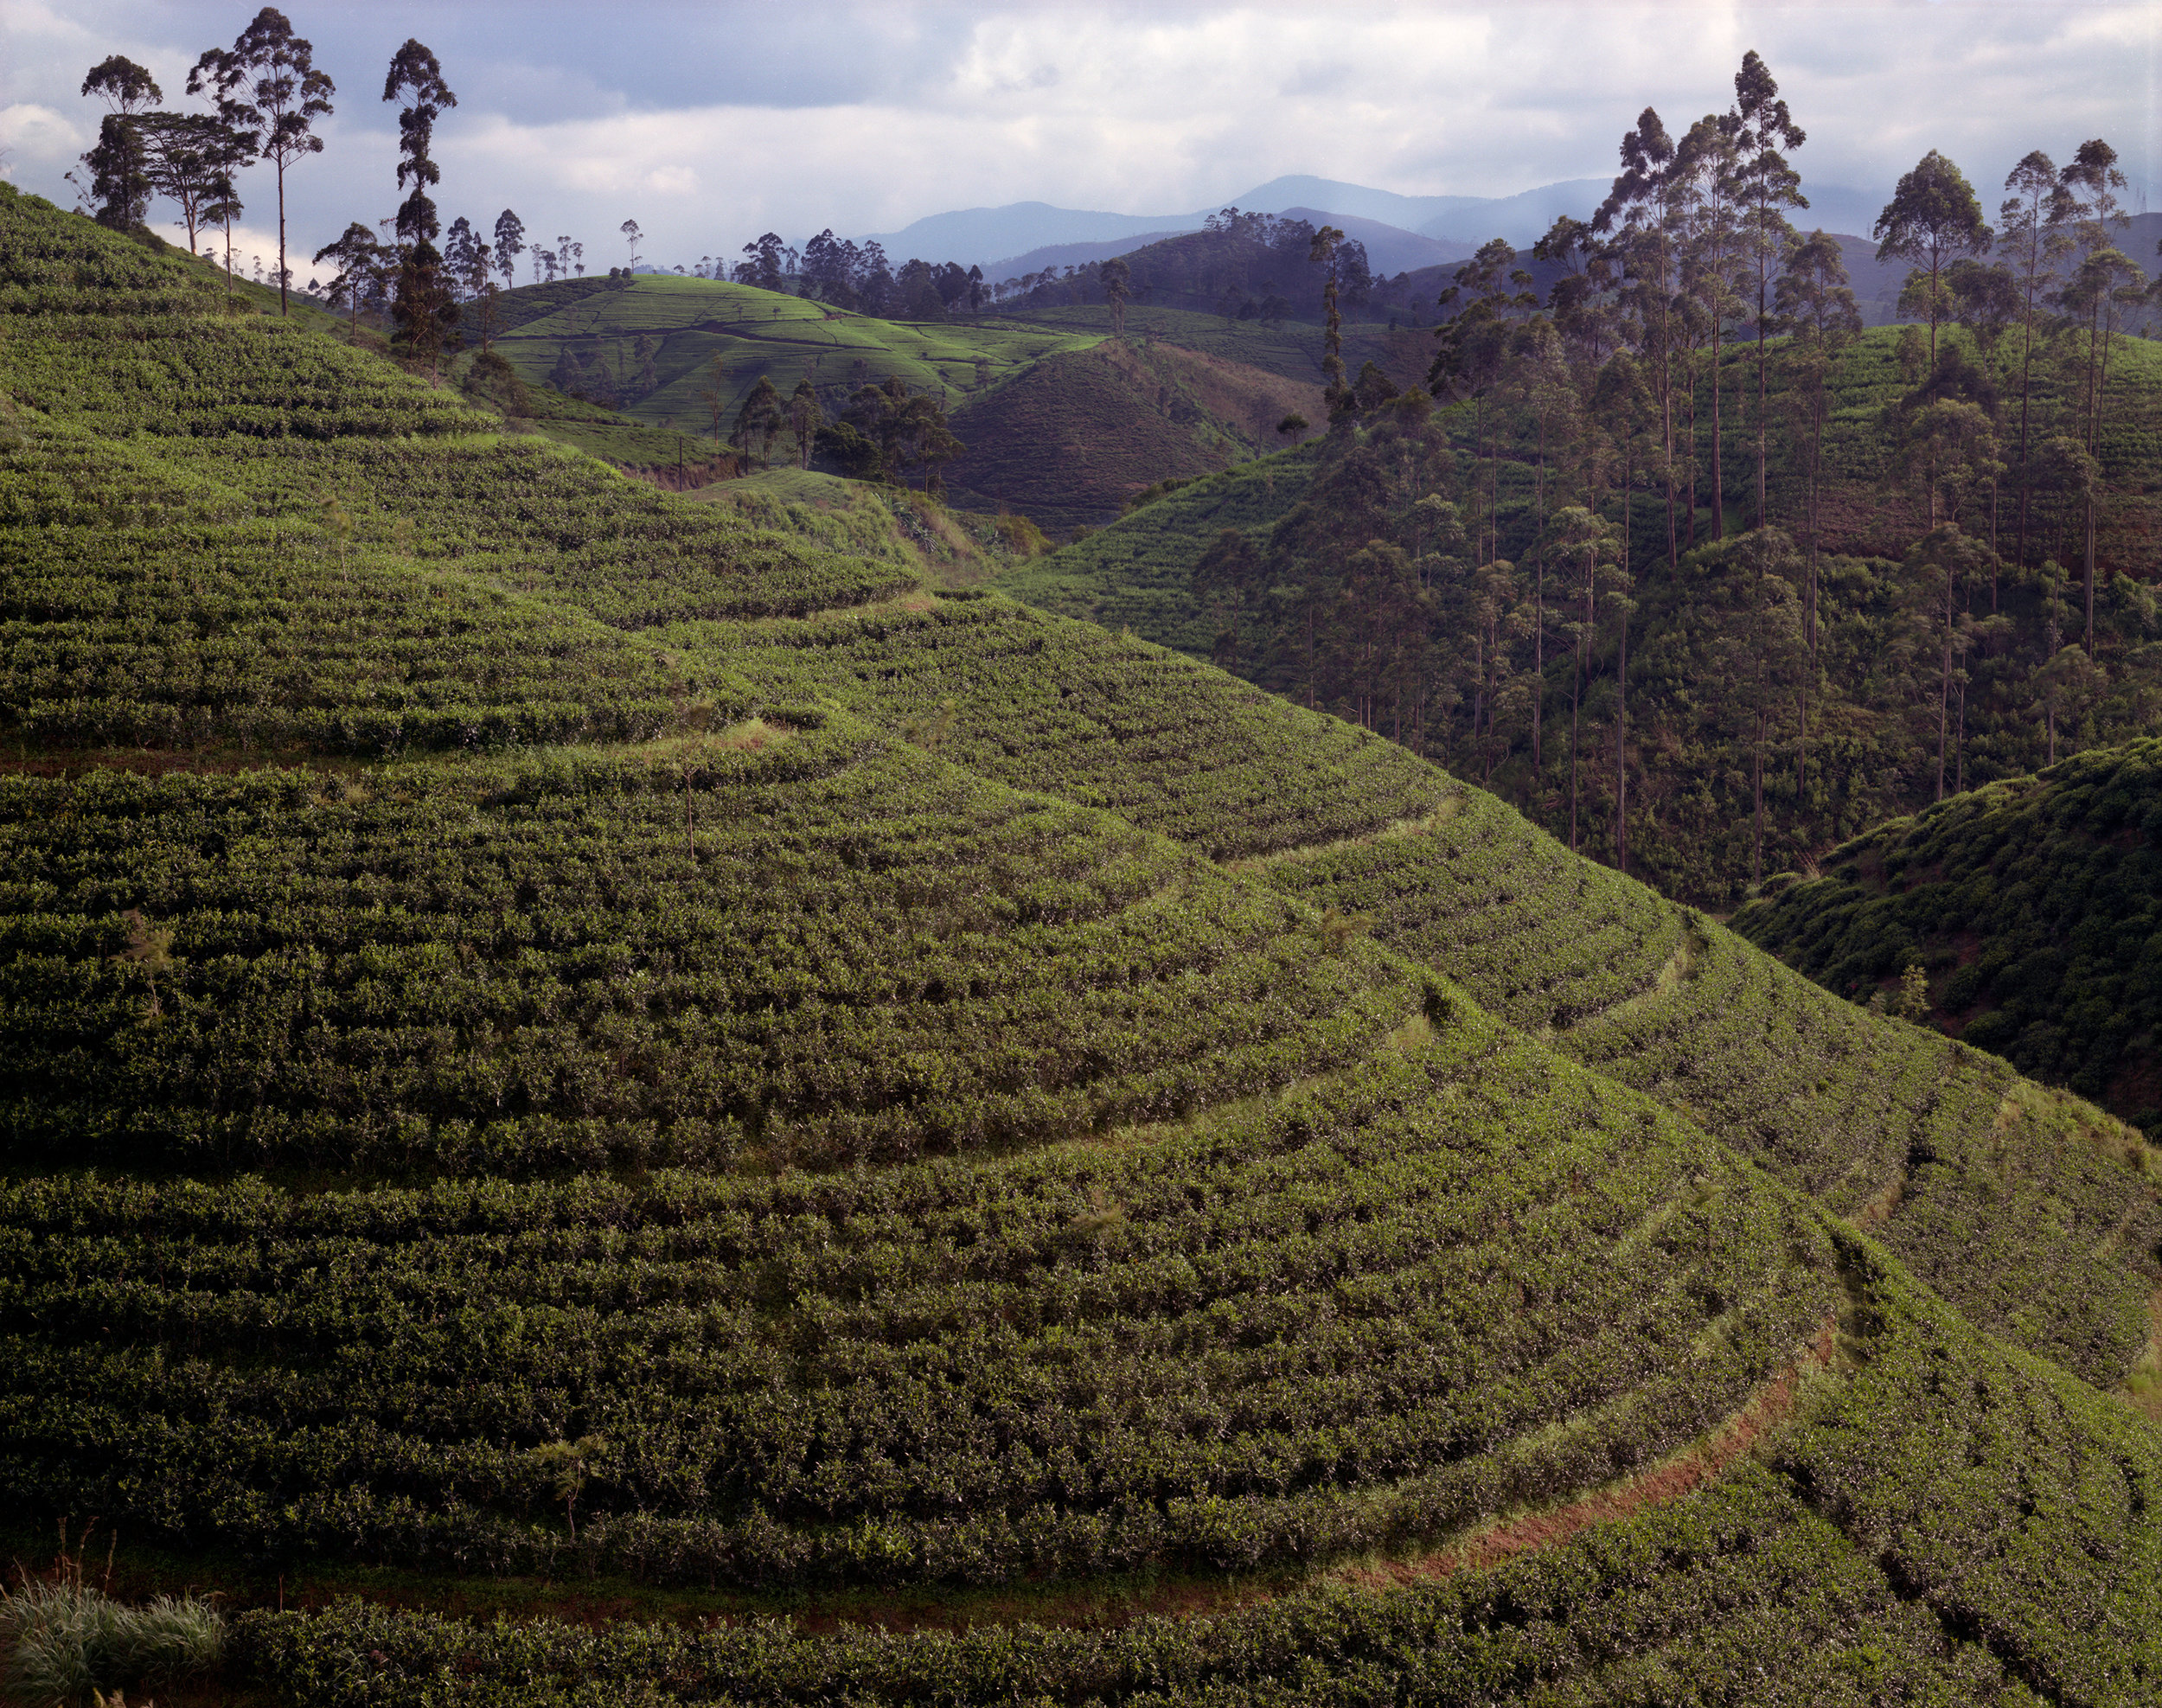  Tea plantation first planted by the British, now locally owned, Hatton Road, Sri Lanka, 1993 